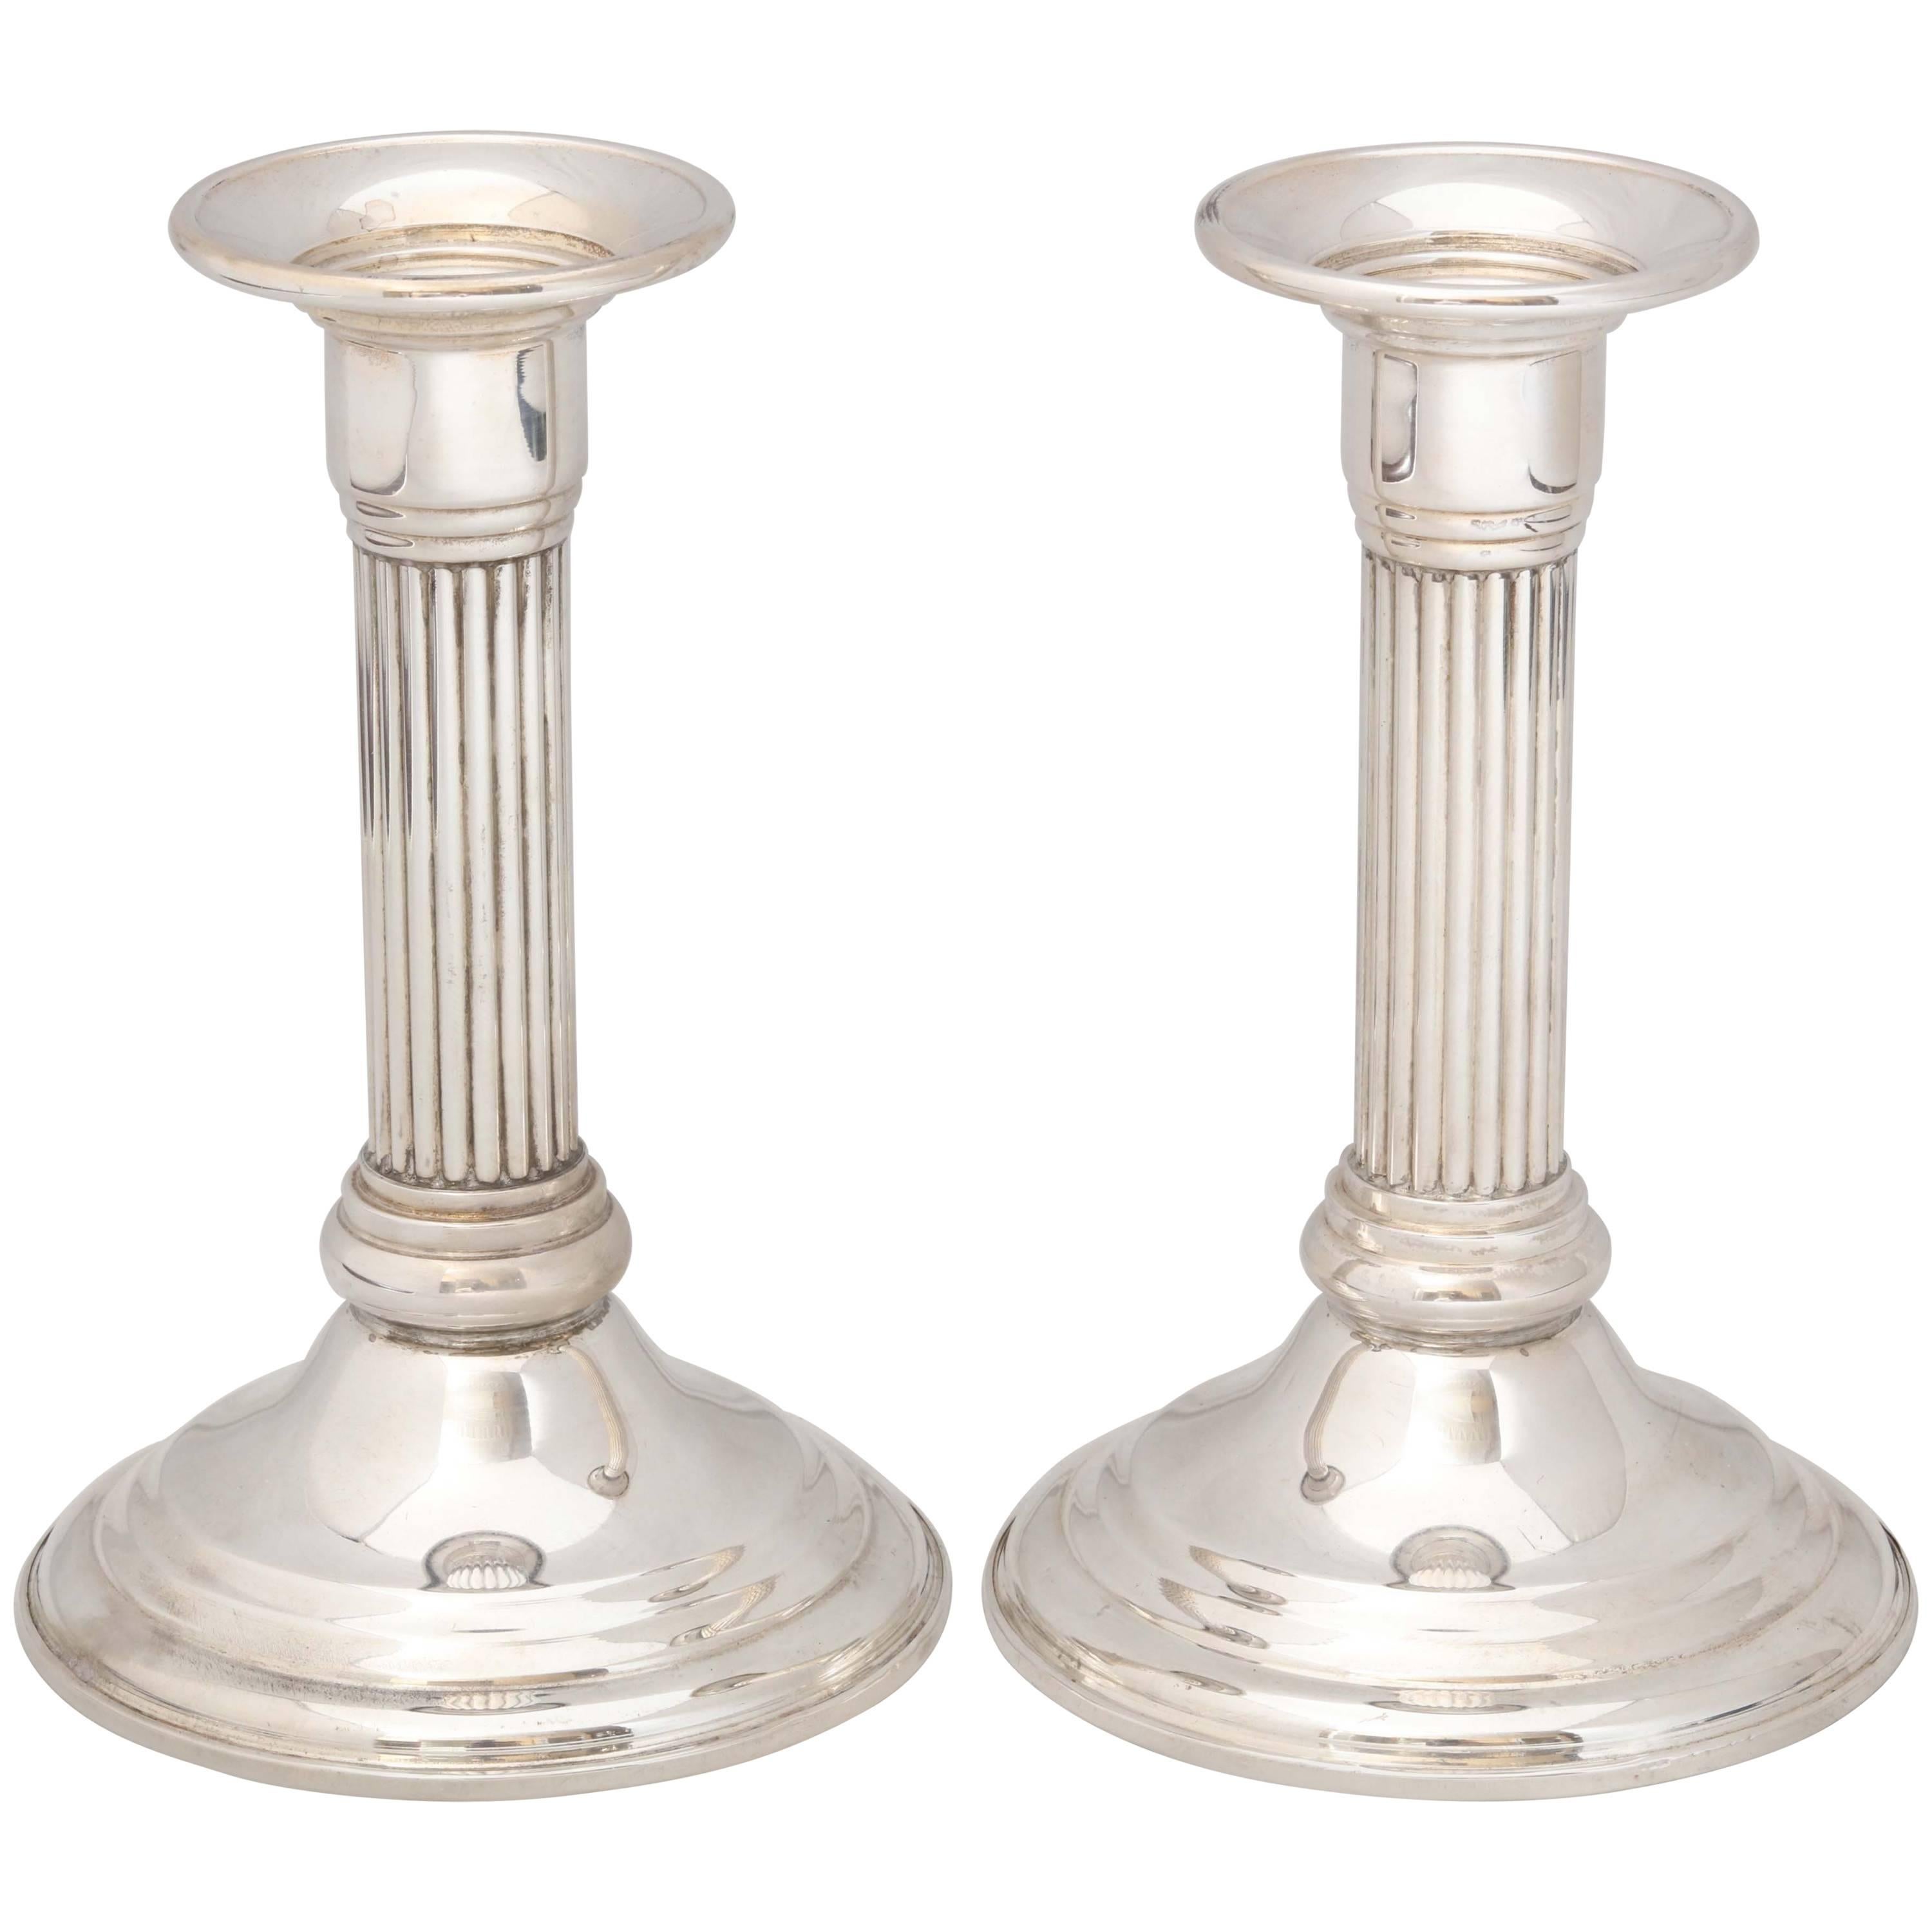 Pair of Sterling Silver Neoclassical Candlesticks